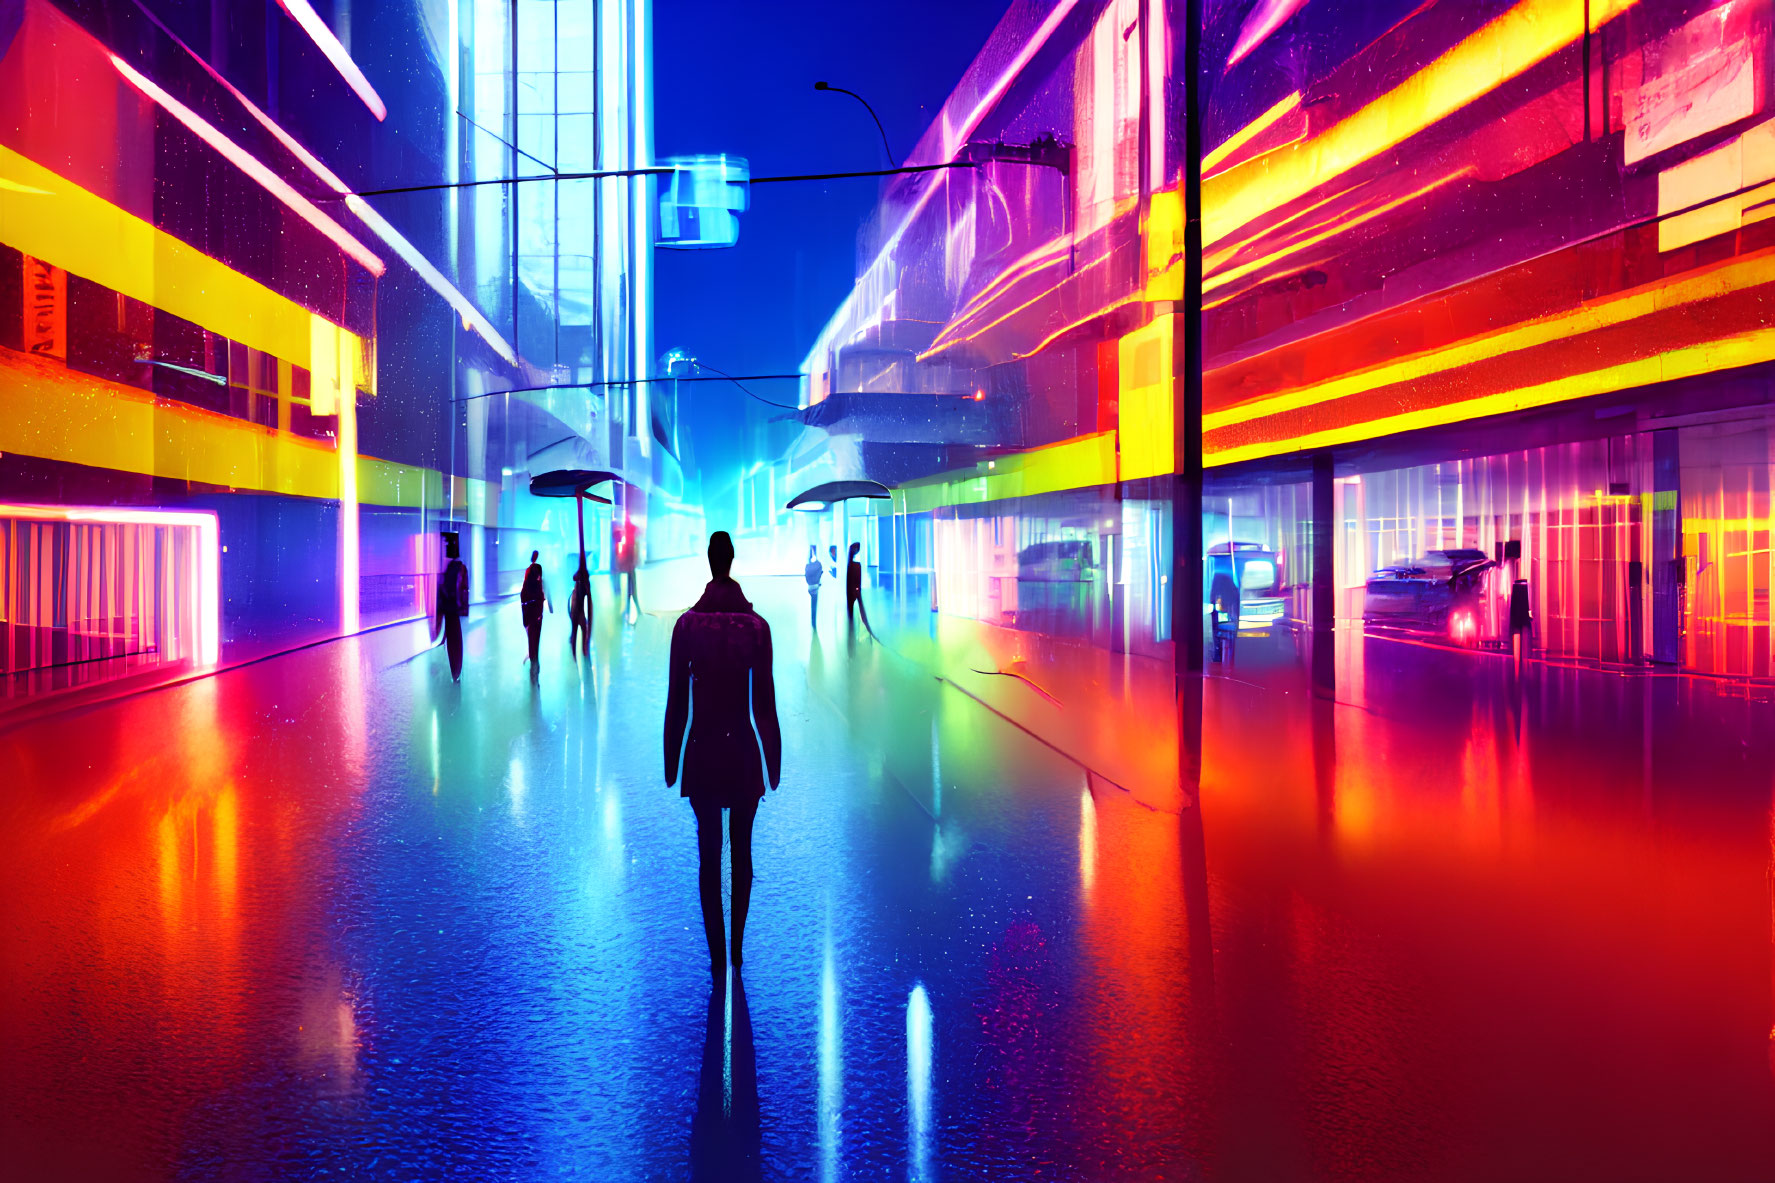 Vibrant futuristic cityscape with neon lights, pedestrians, and cars at night